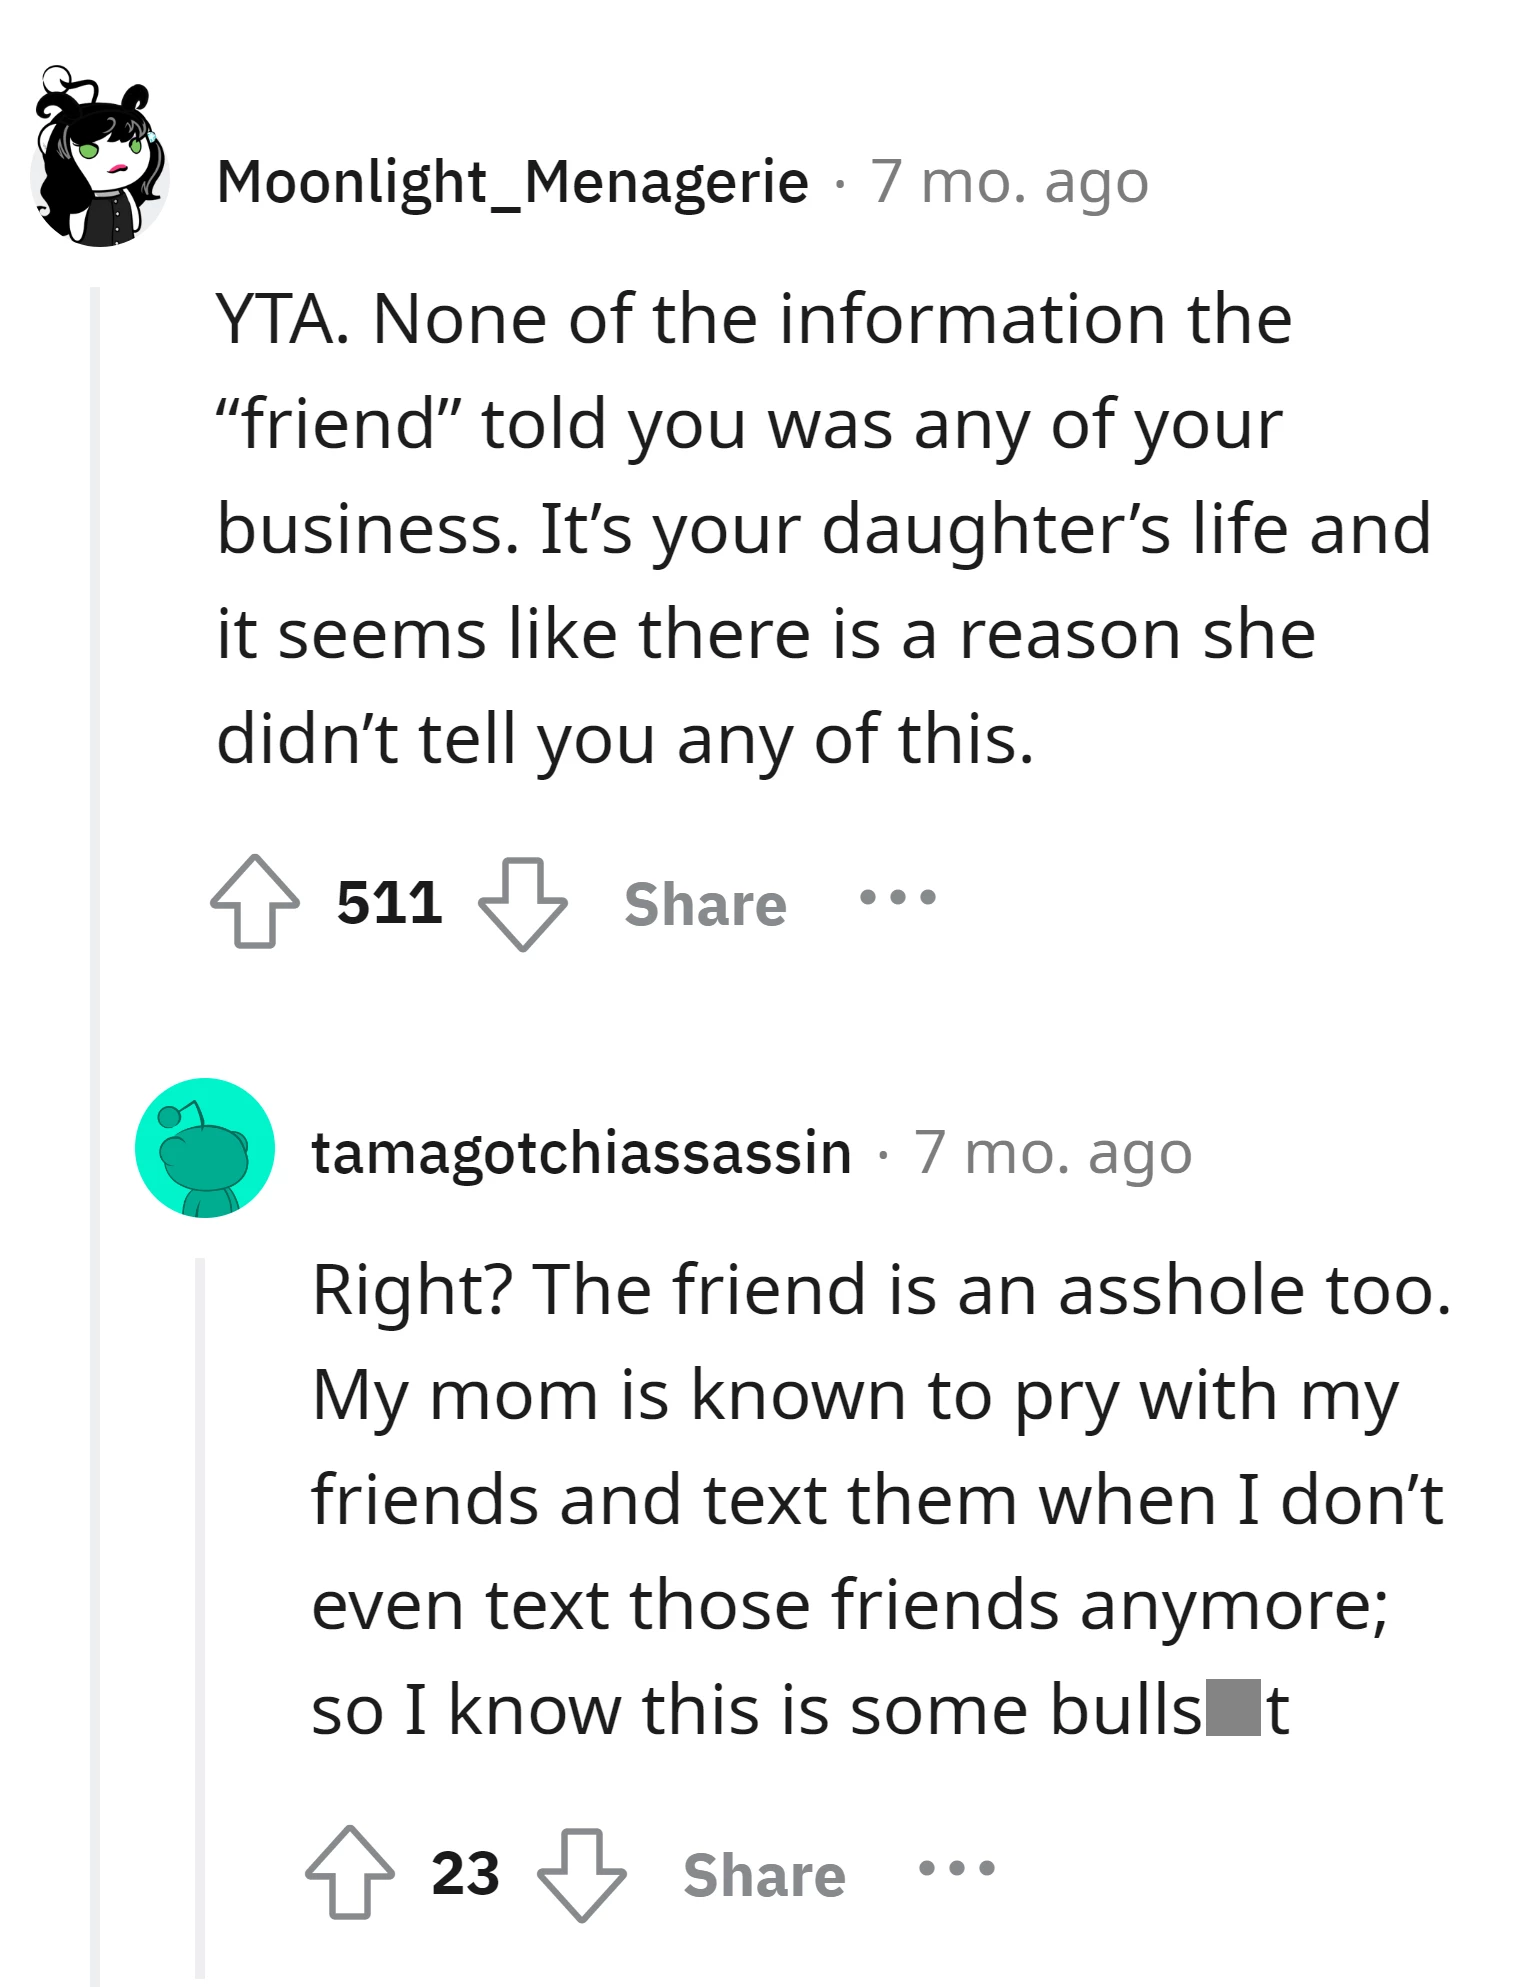 There's likely a reason the daughter didn't share it